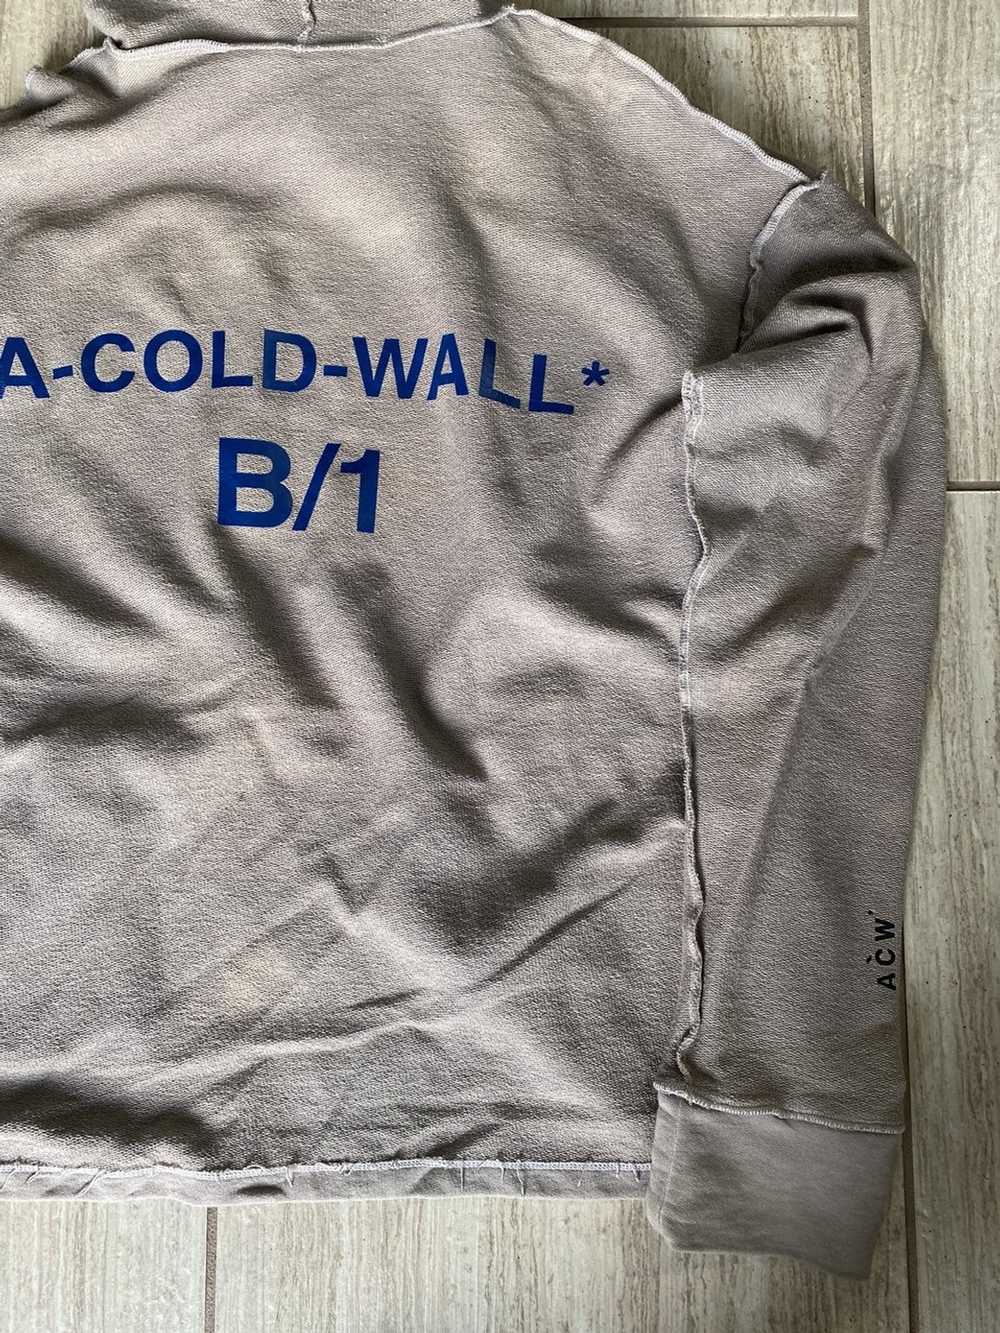 A Cold Wall A Cold Wall Split Hoodie - image 2